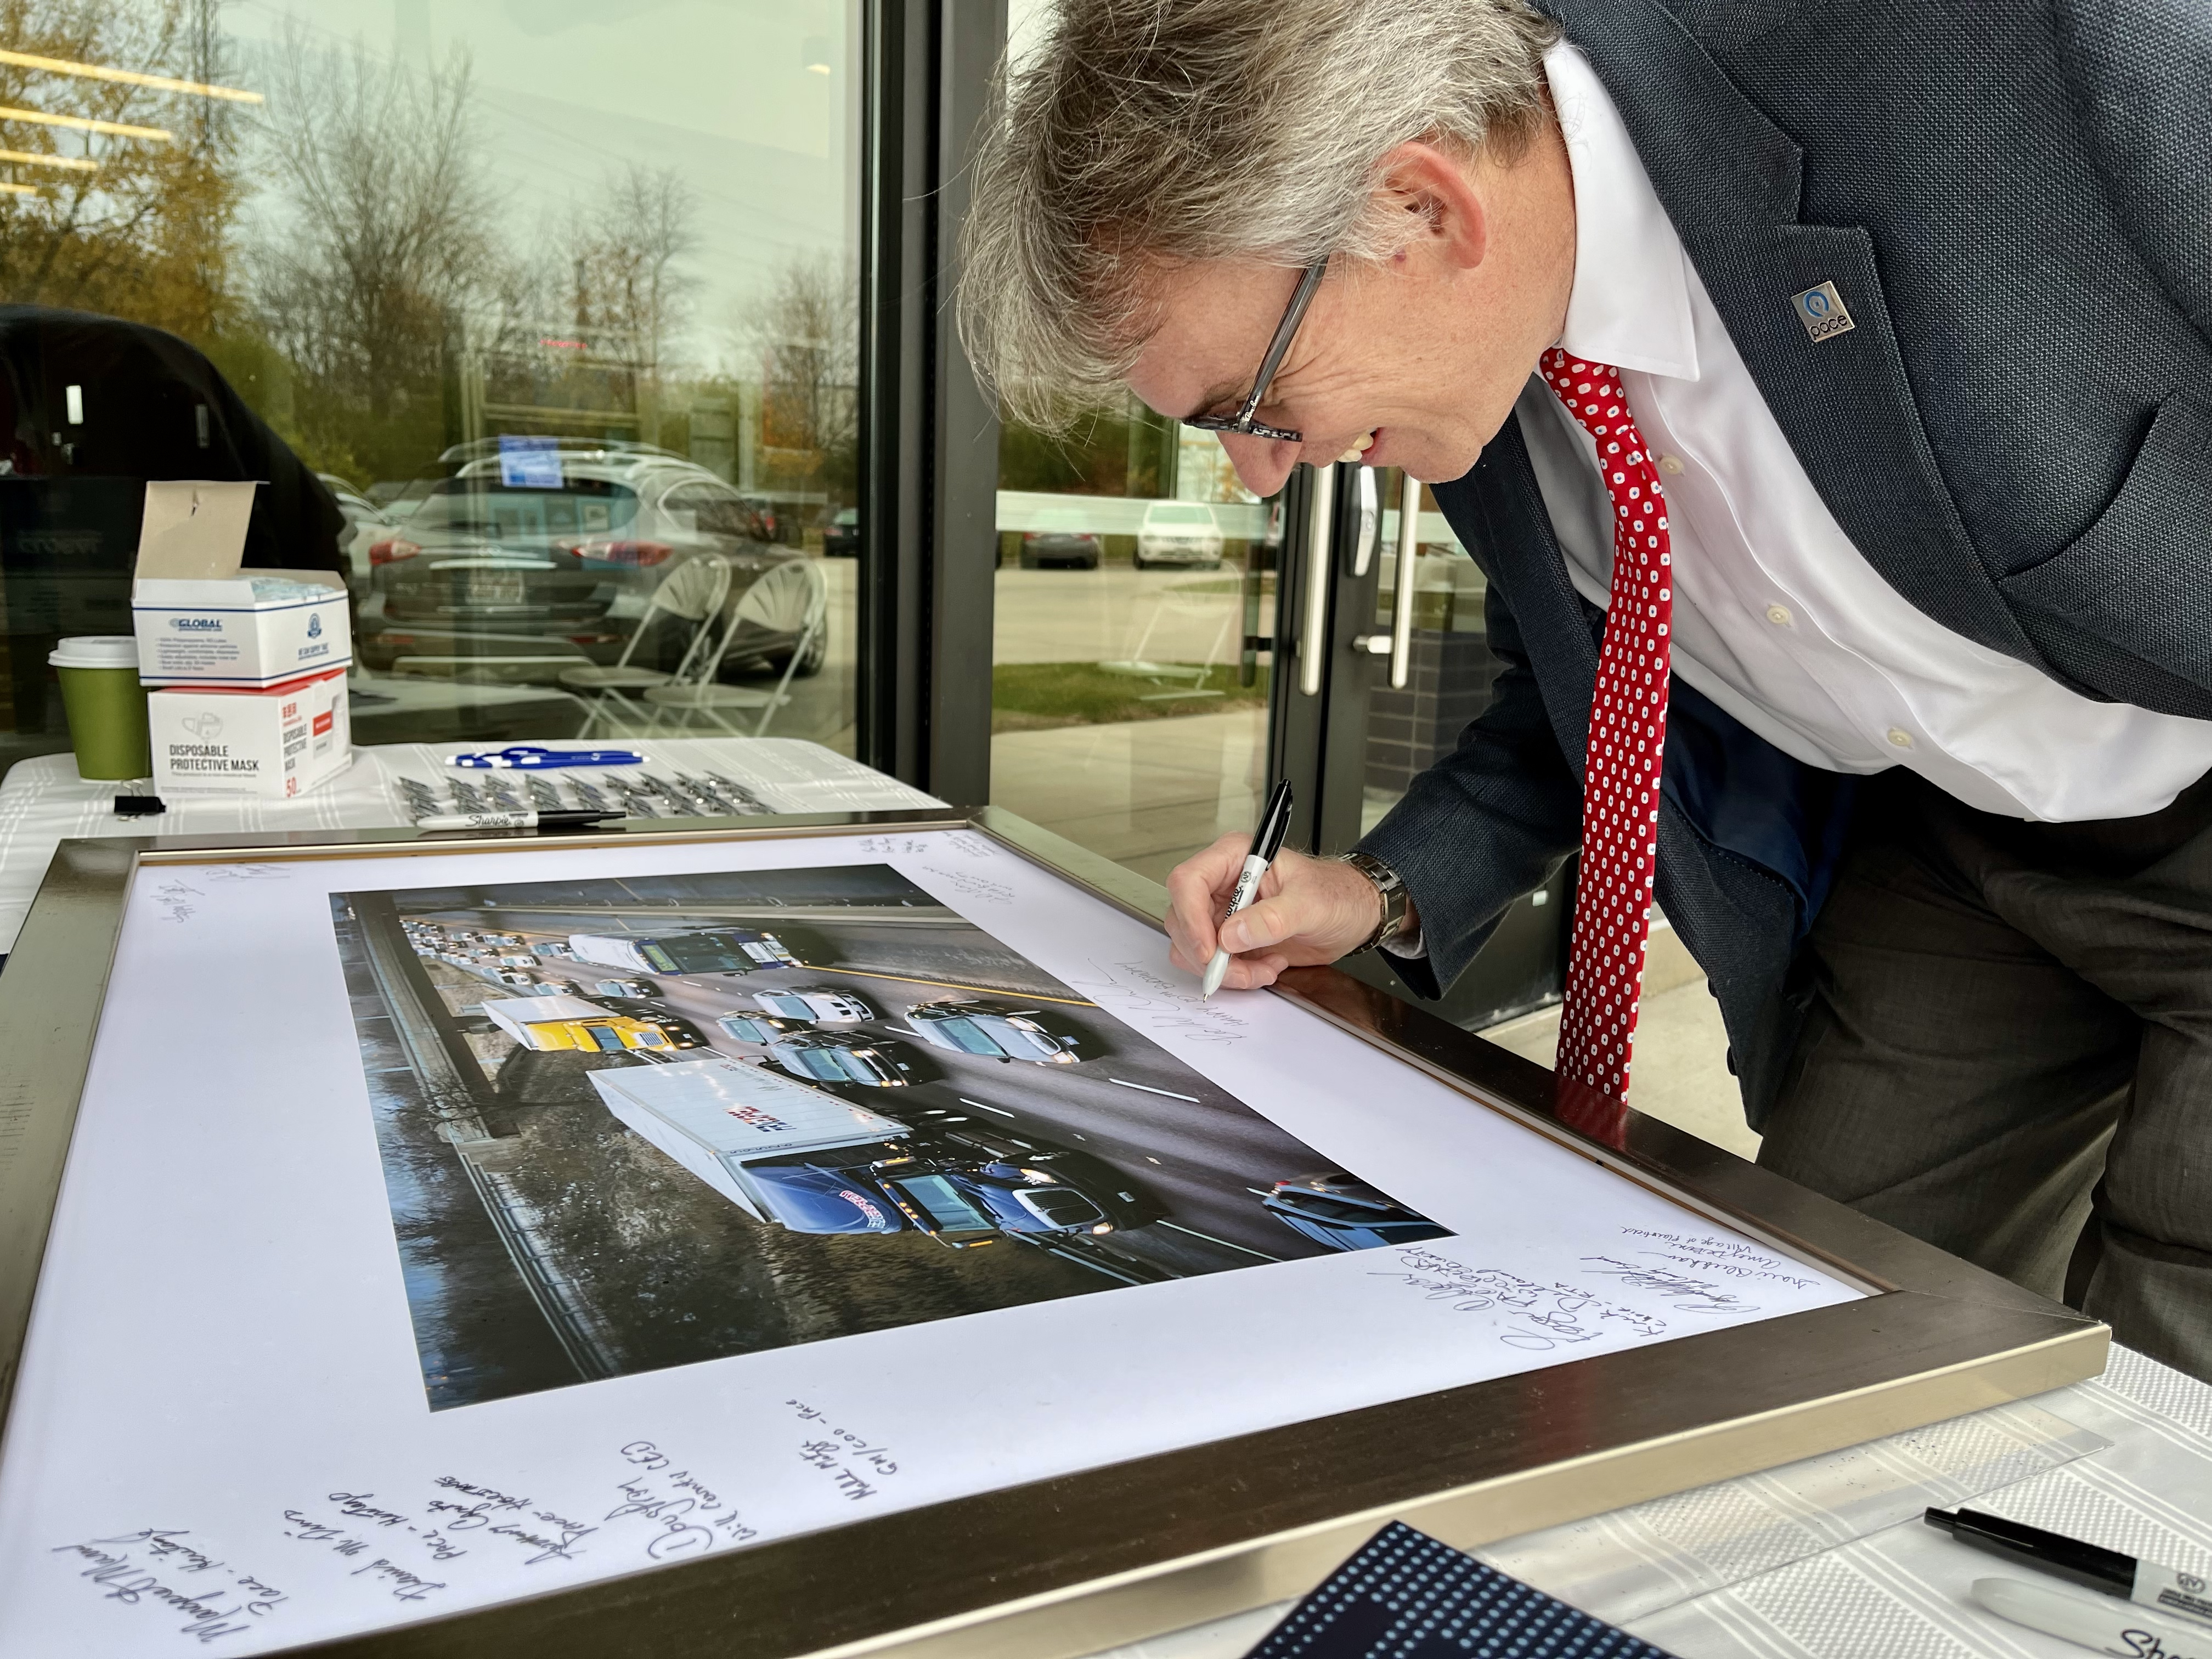 An image that shows Pace Executive Director Rocky Donahue signs commemorative